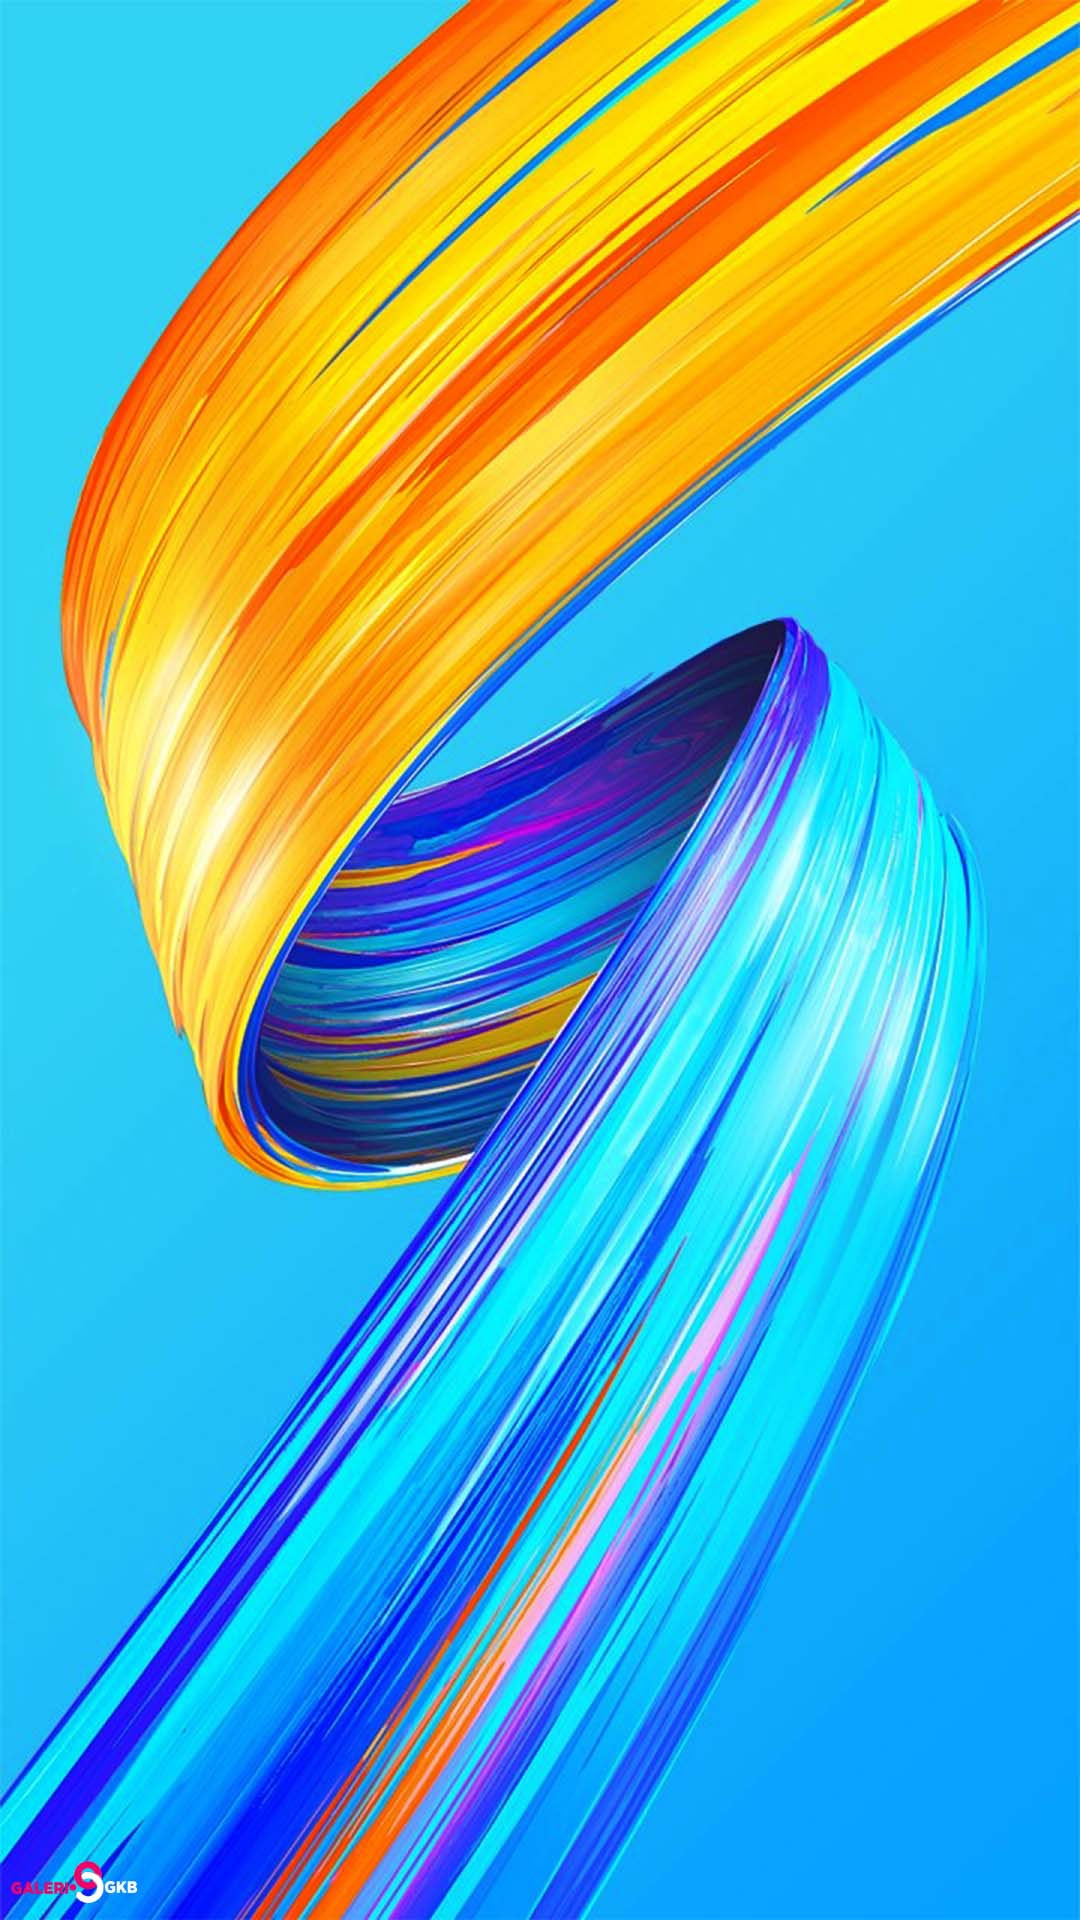 Abstract 4K Ultra HD Wallpaper For iPhone and Android Device